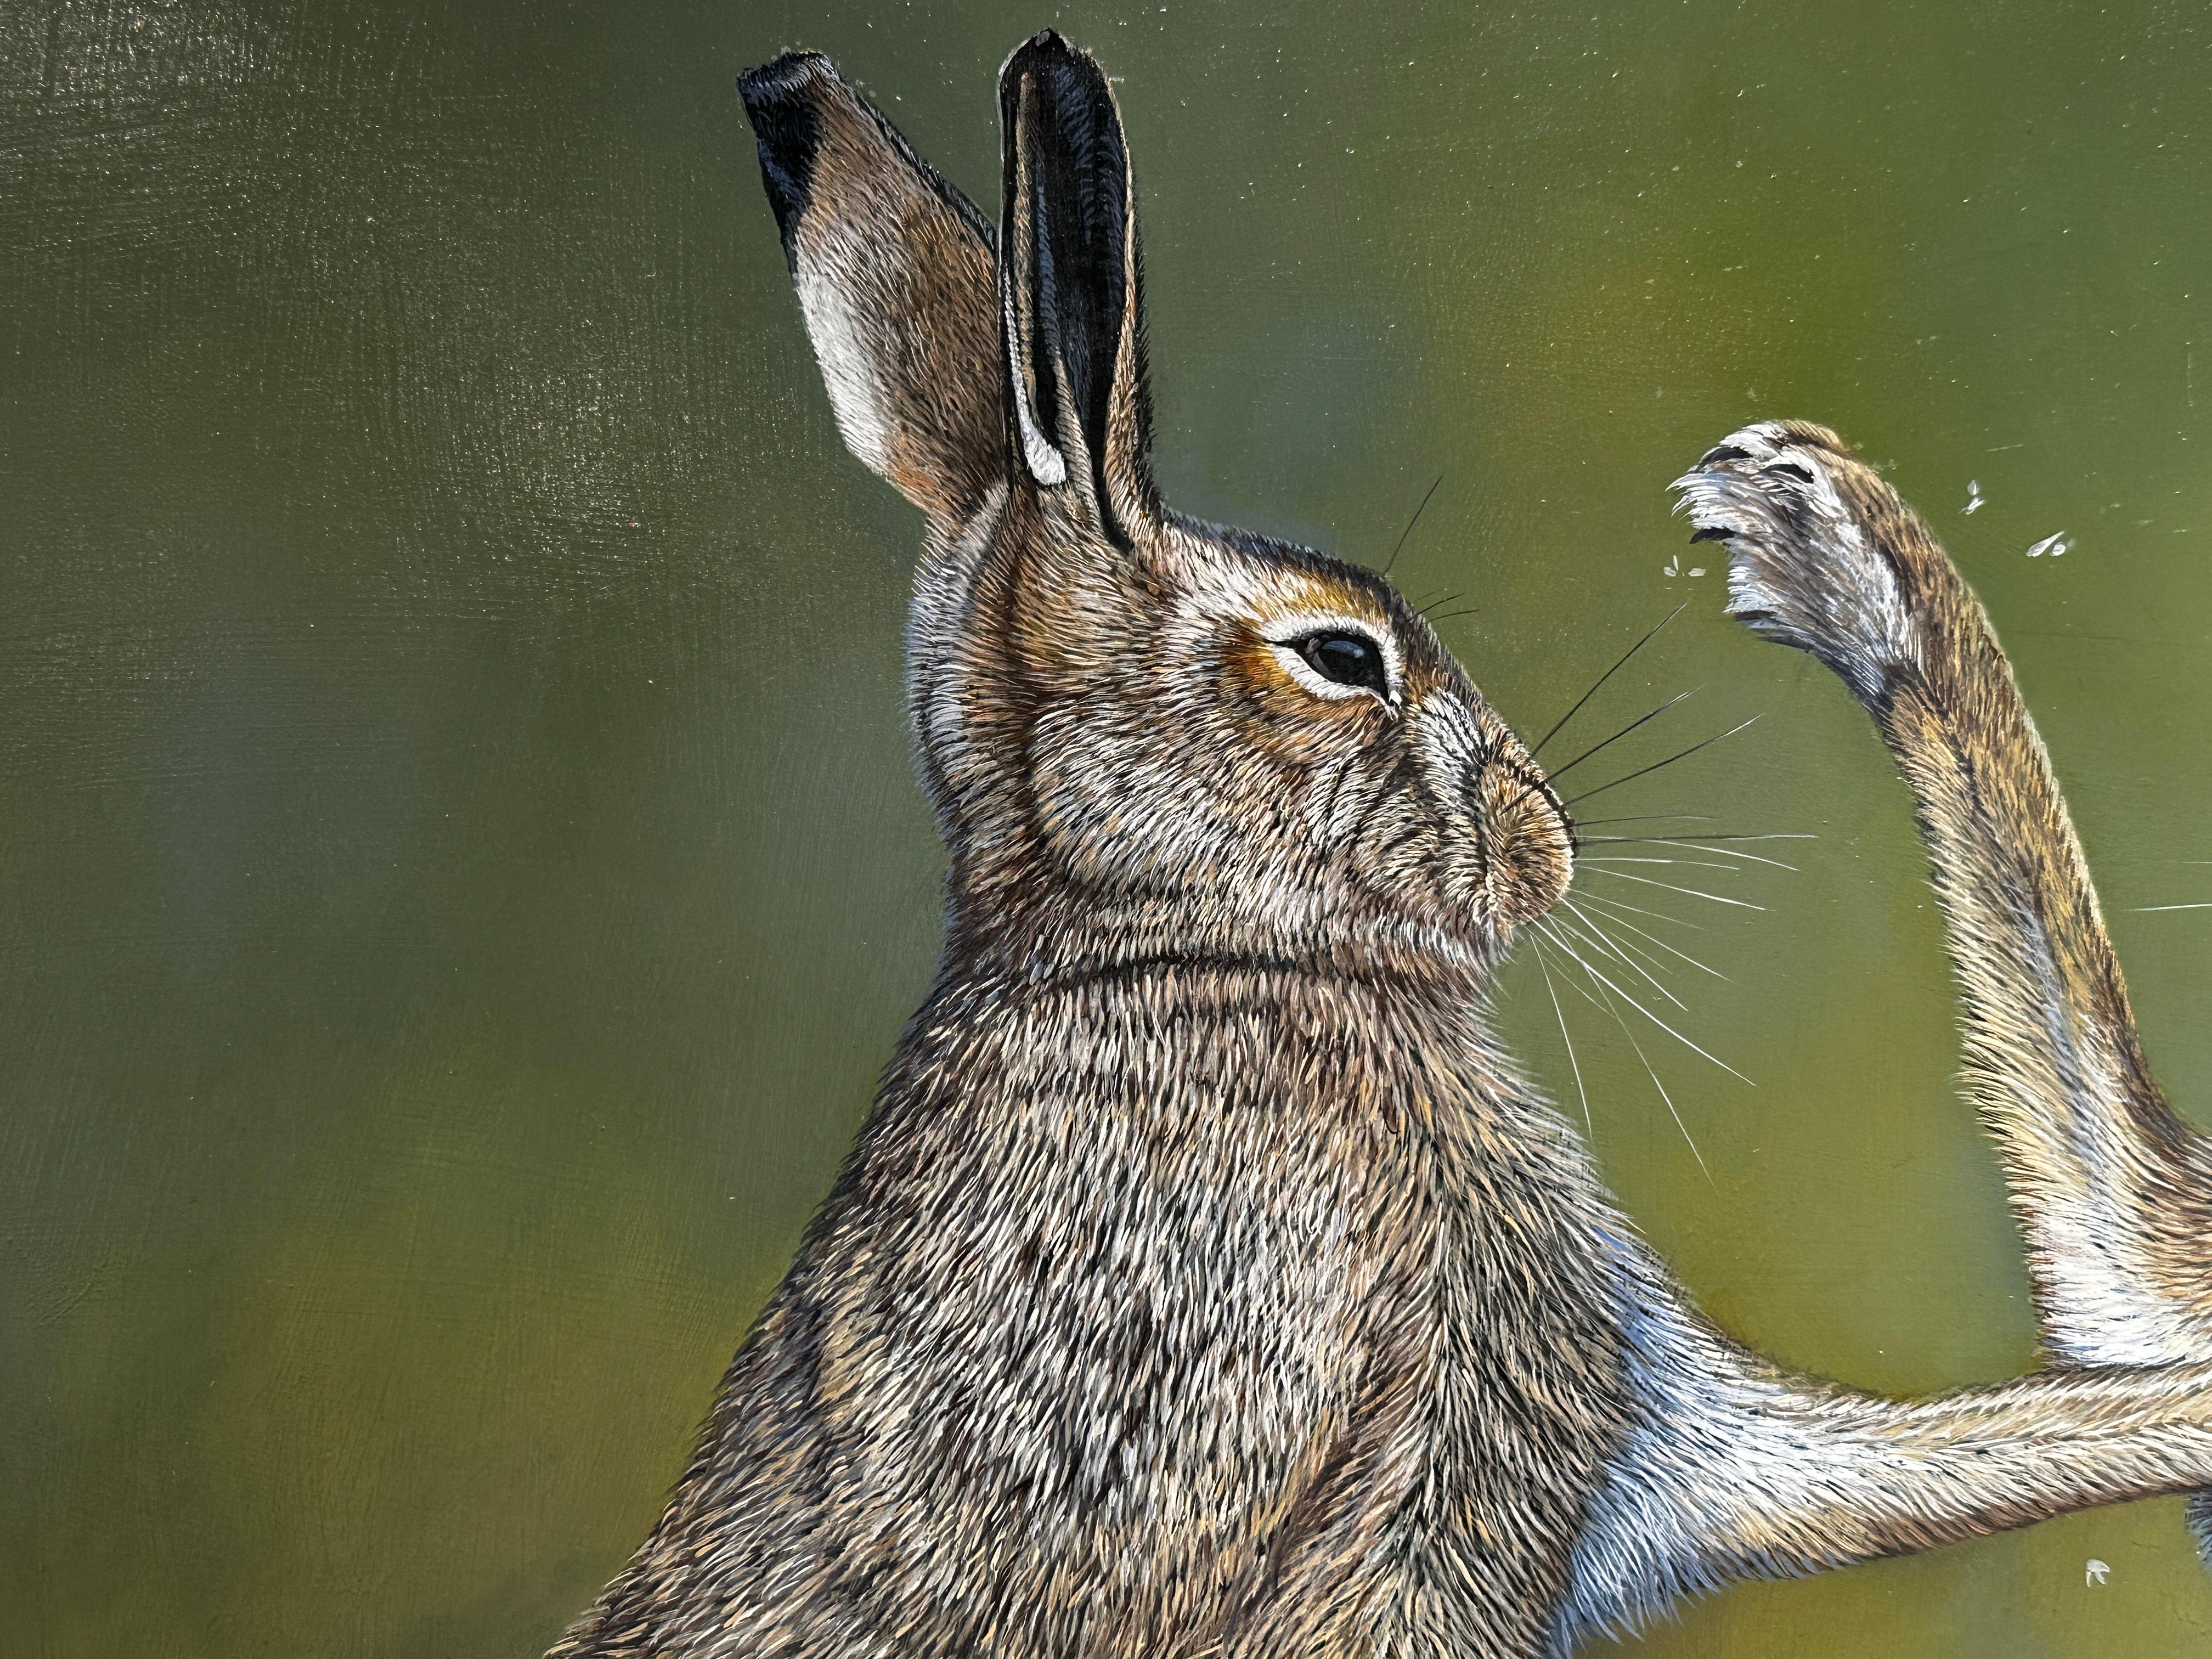 'MadMarch' by Ben Waddams is a Contemporary Realist Wildlife oil painting of a two boxing hares in the wild. 

Ben Waddams is a British wildlife artist living and working in Shropshire. Originally from Buckinghamshire, South East England, Ben has